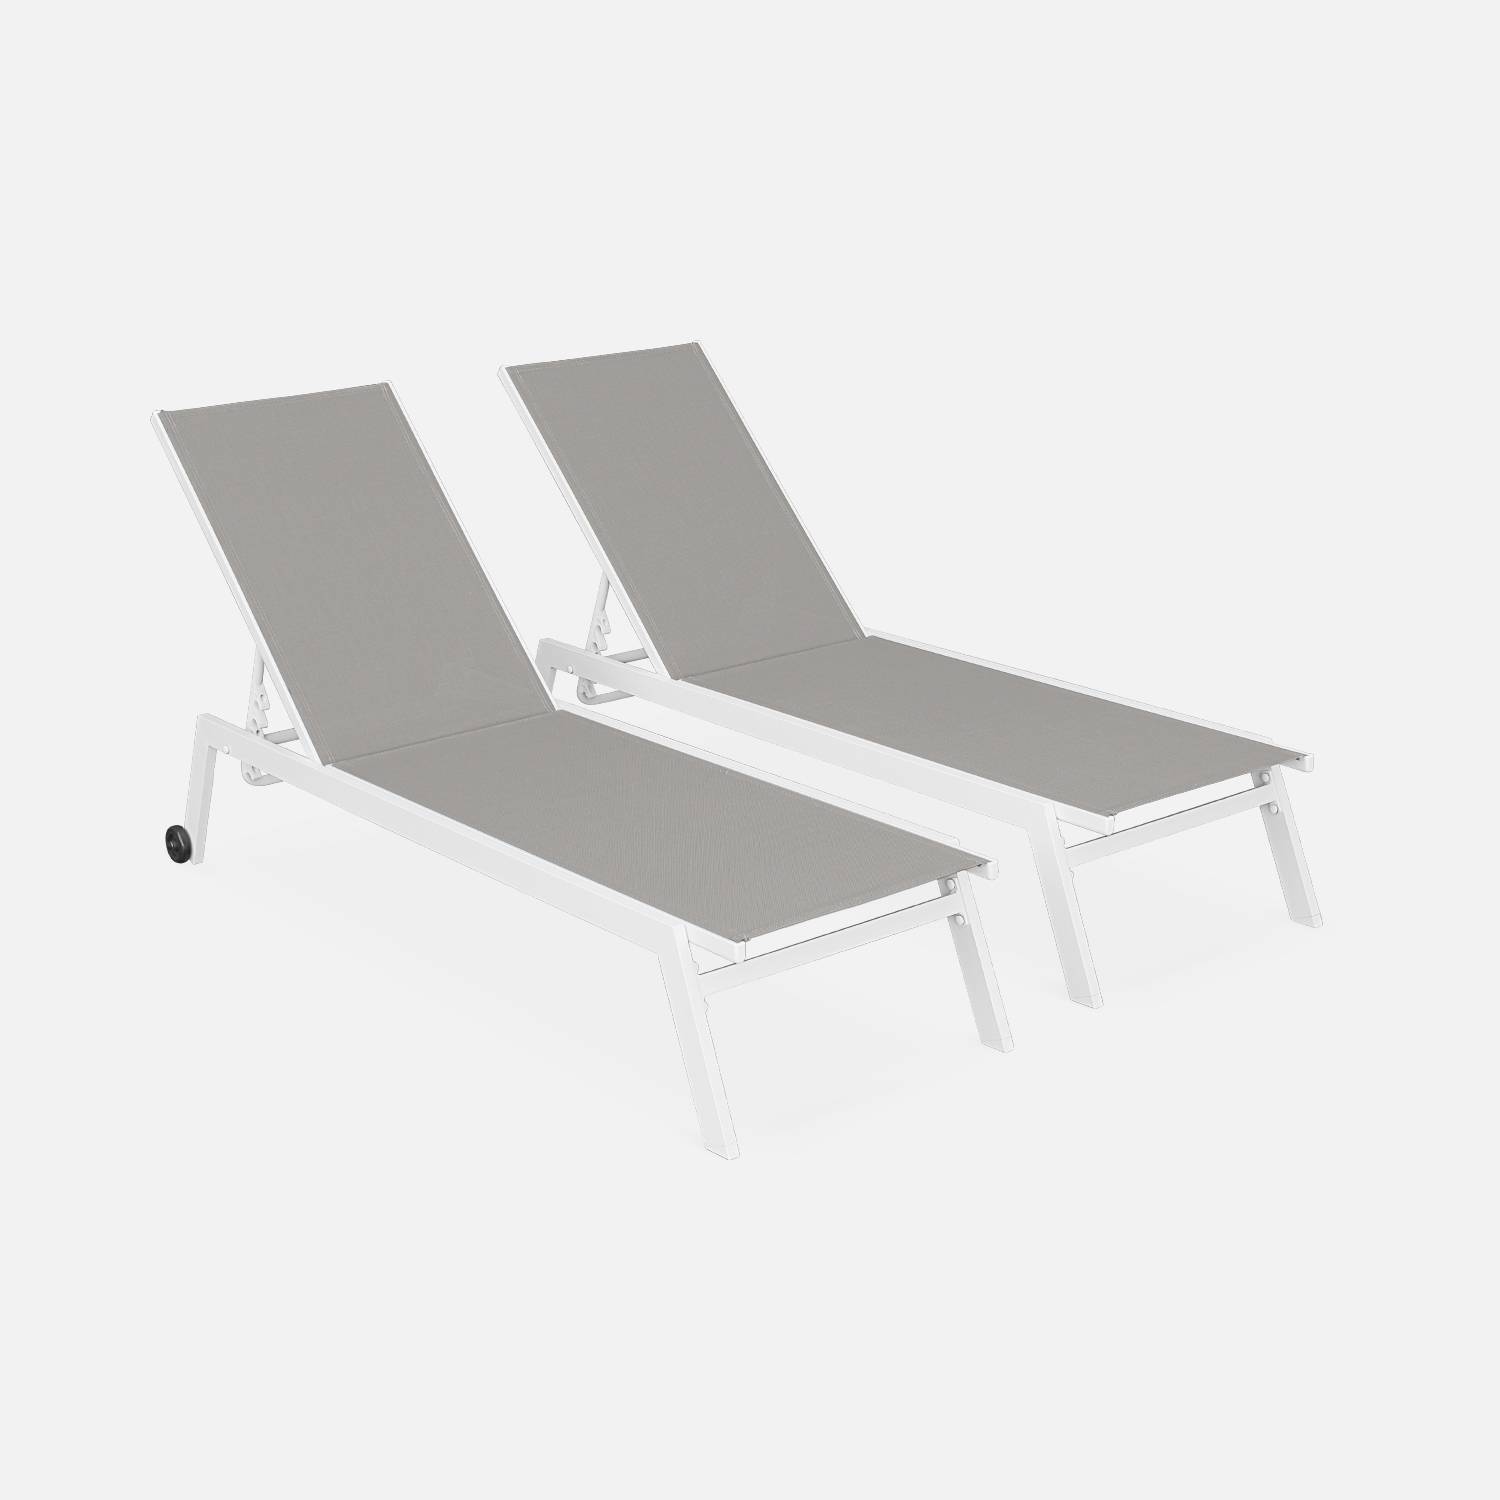 Set of 2 sun loungers in aluminium with wheels, White/Taupe | sweeek